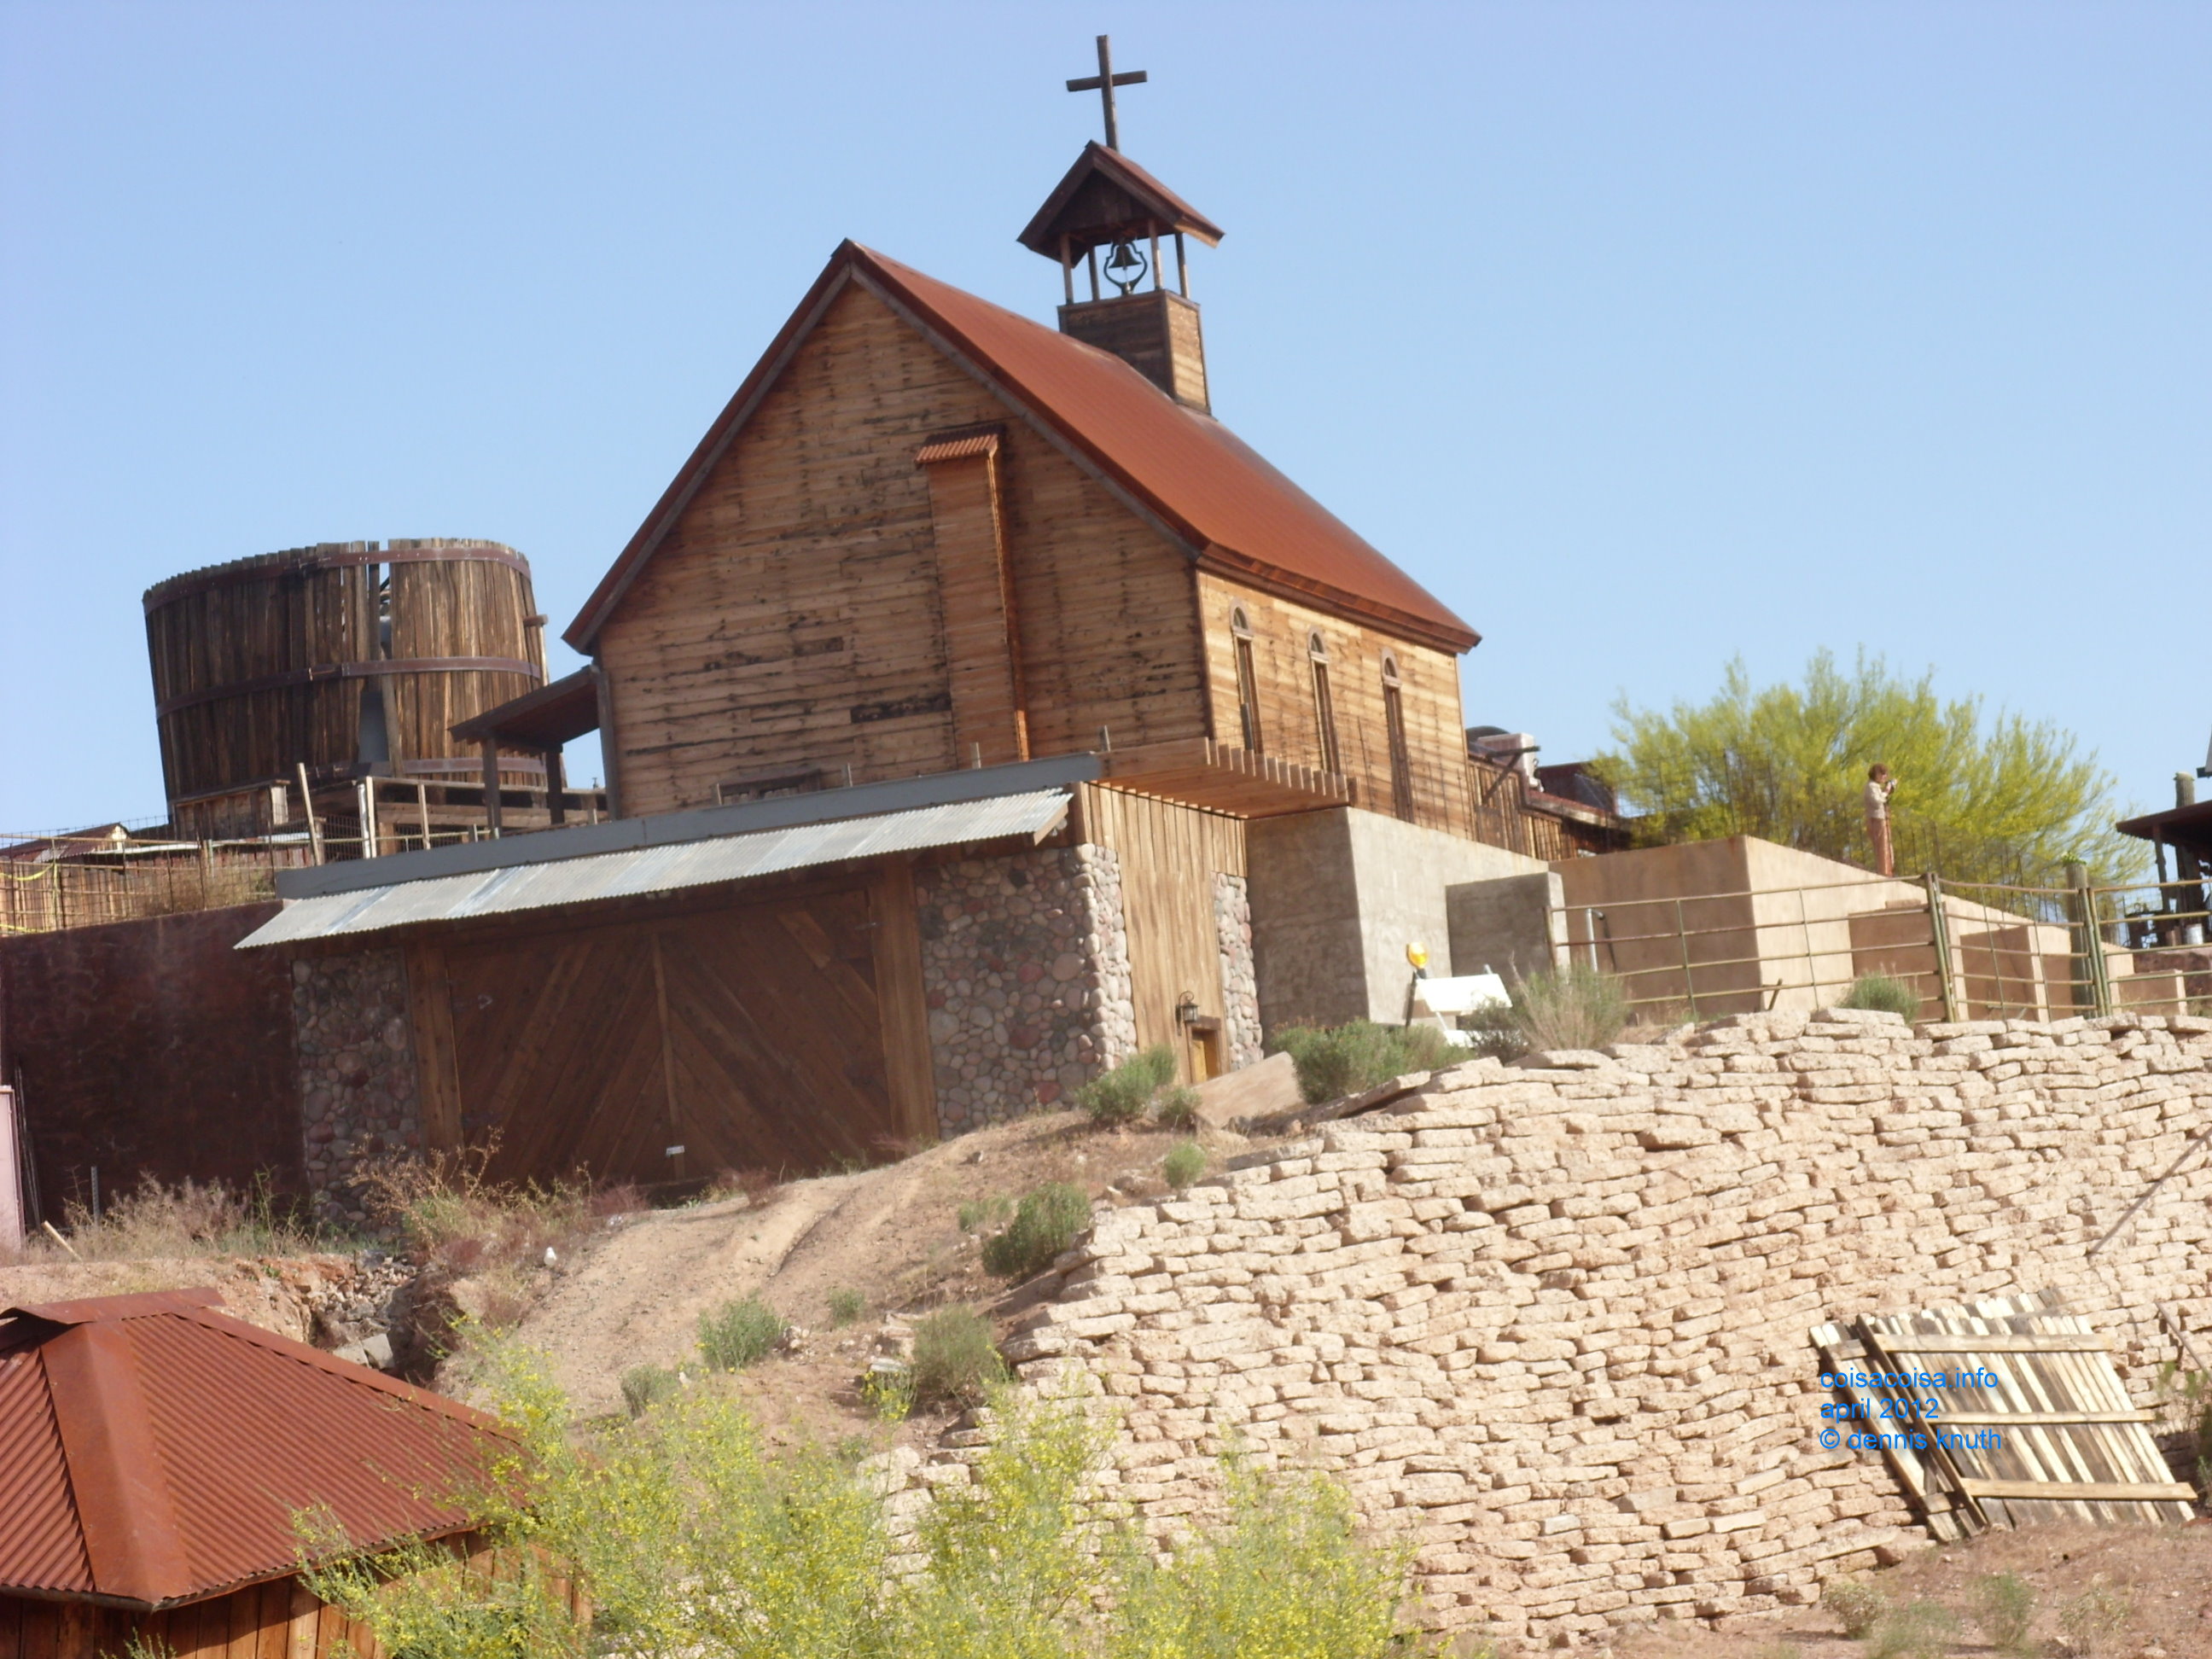 2012_04_26_e_apache_junction_ghost_town_0020.jpg (large)